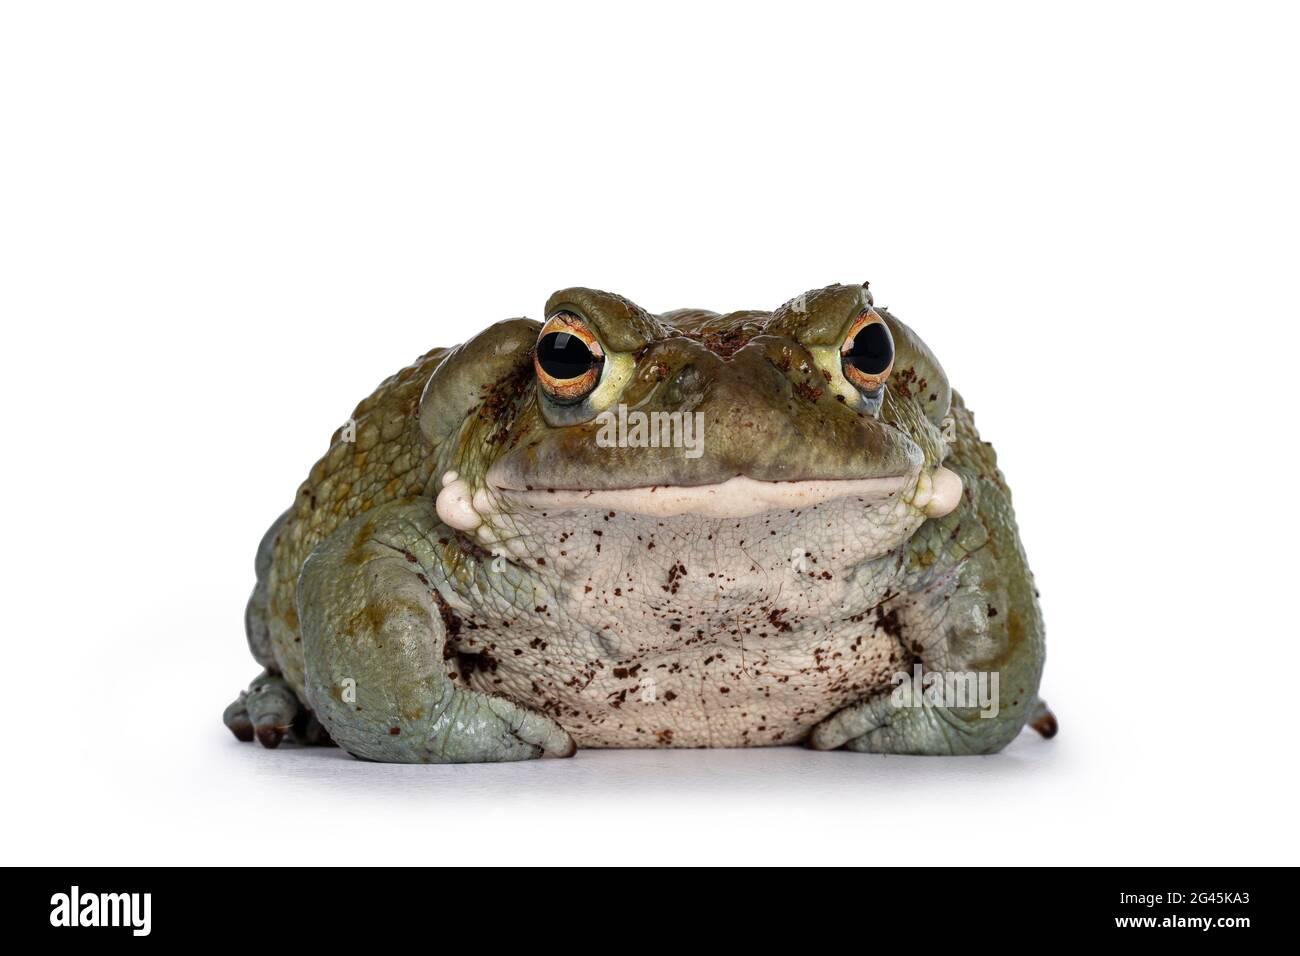 Bufo Alvarius aka Colorado River Toad, sitting facing front. Looking to camera with golden eyes. Isolated on white background. Stock Photo